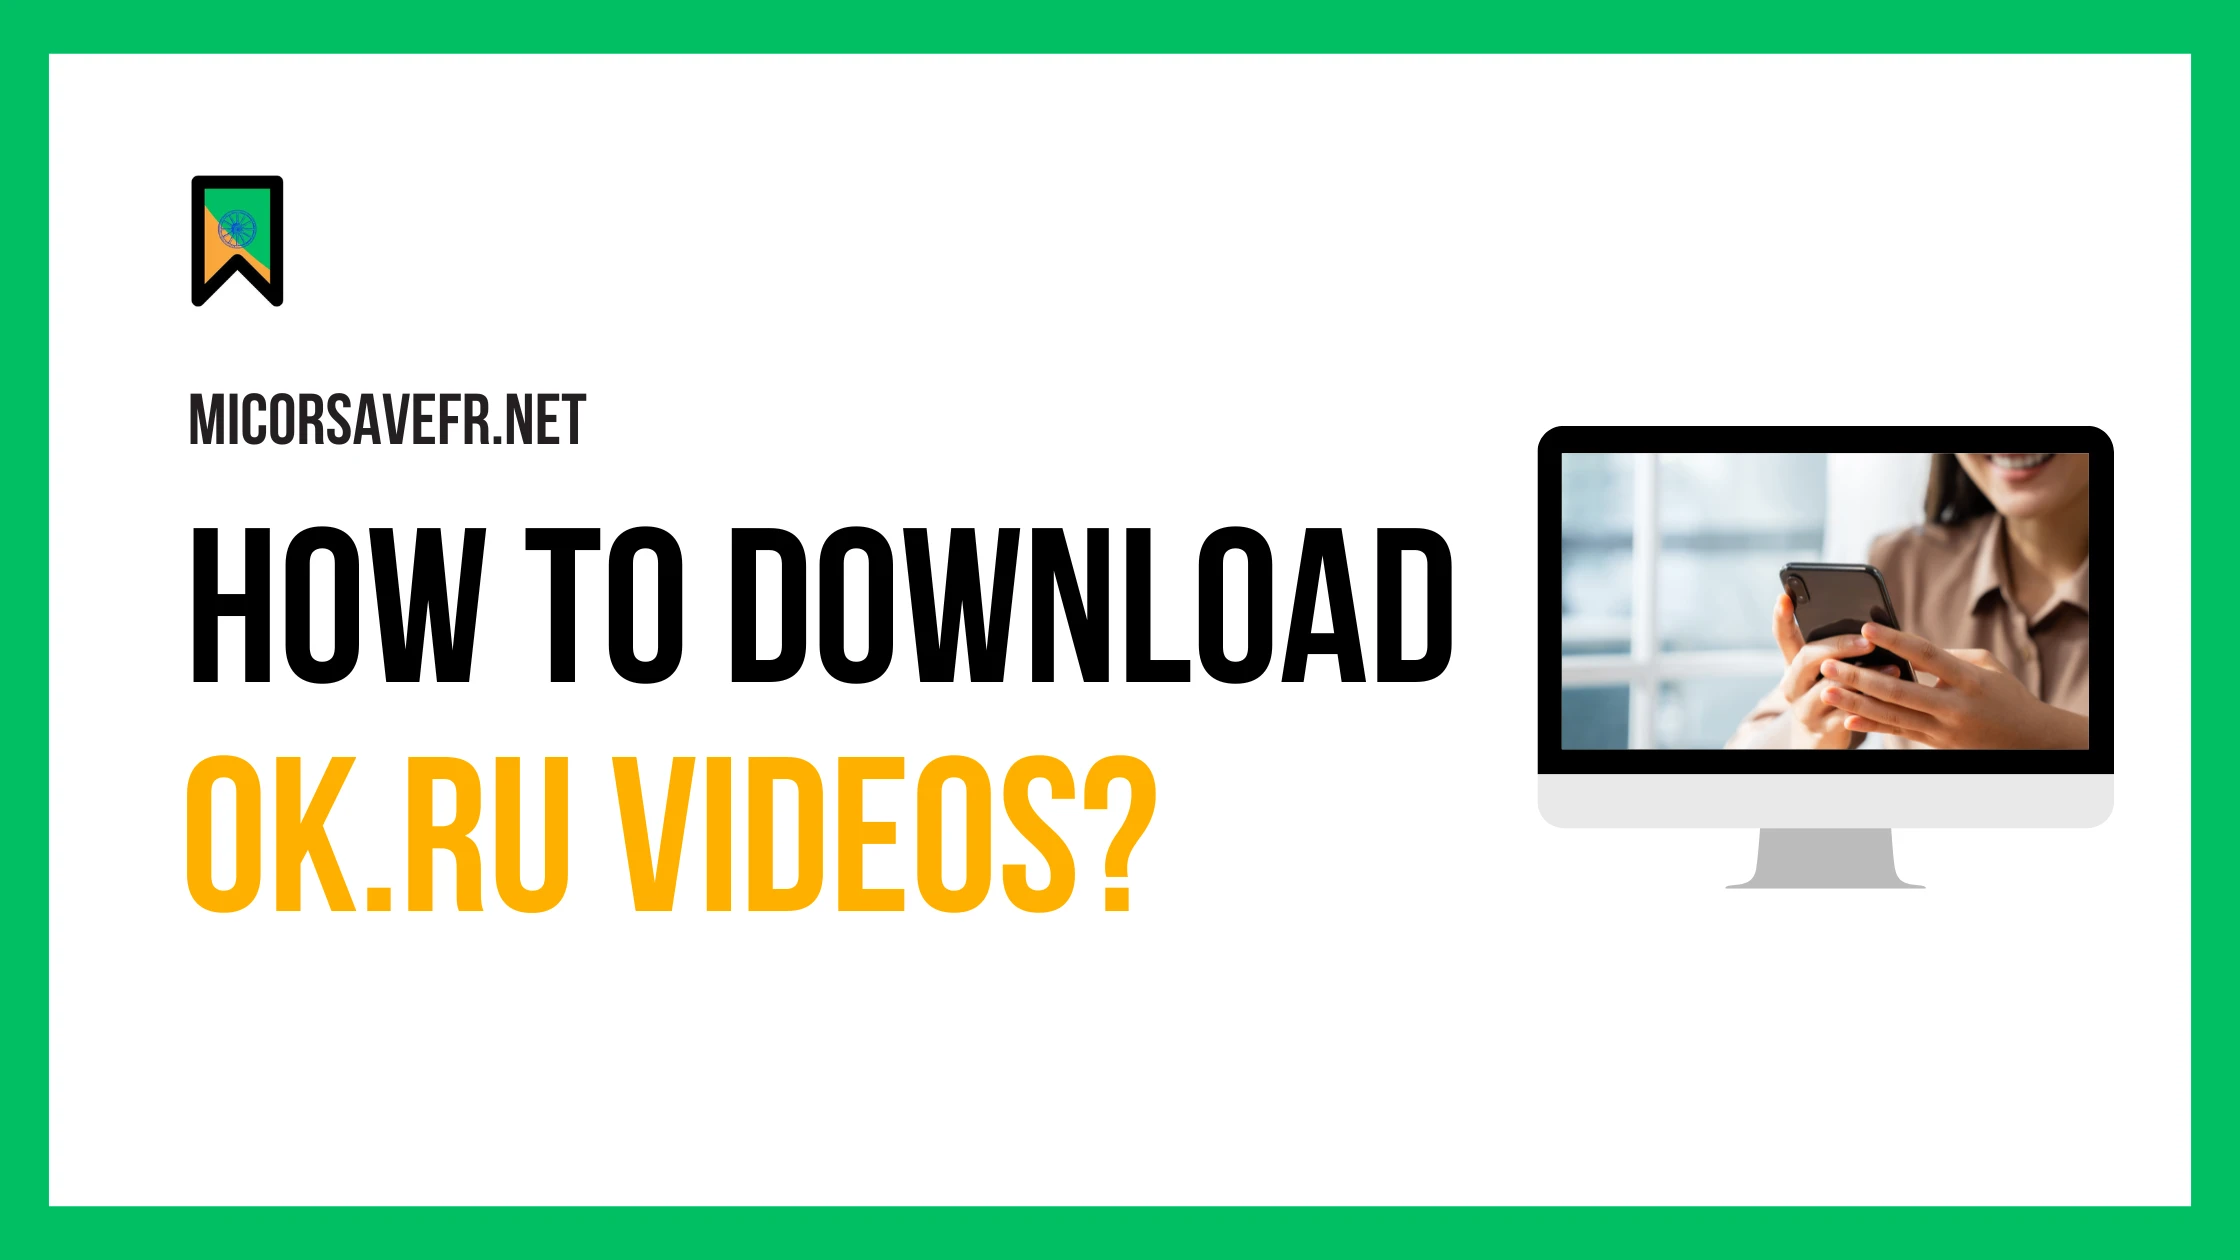 How To Download Videos From Ok ru?